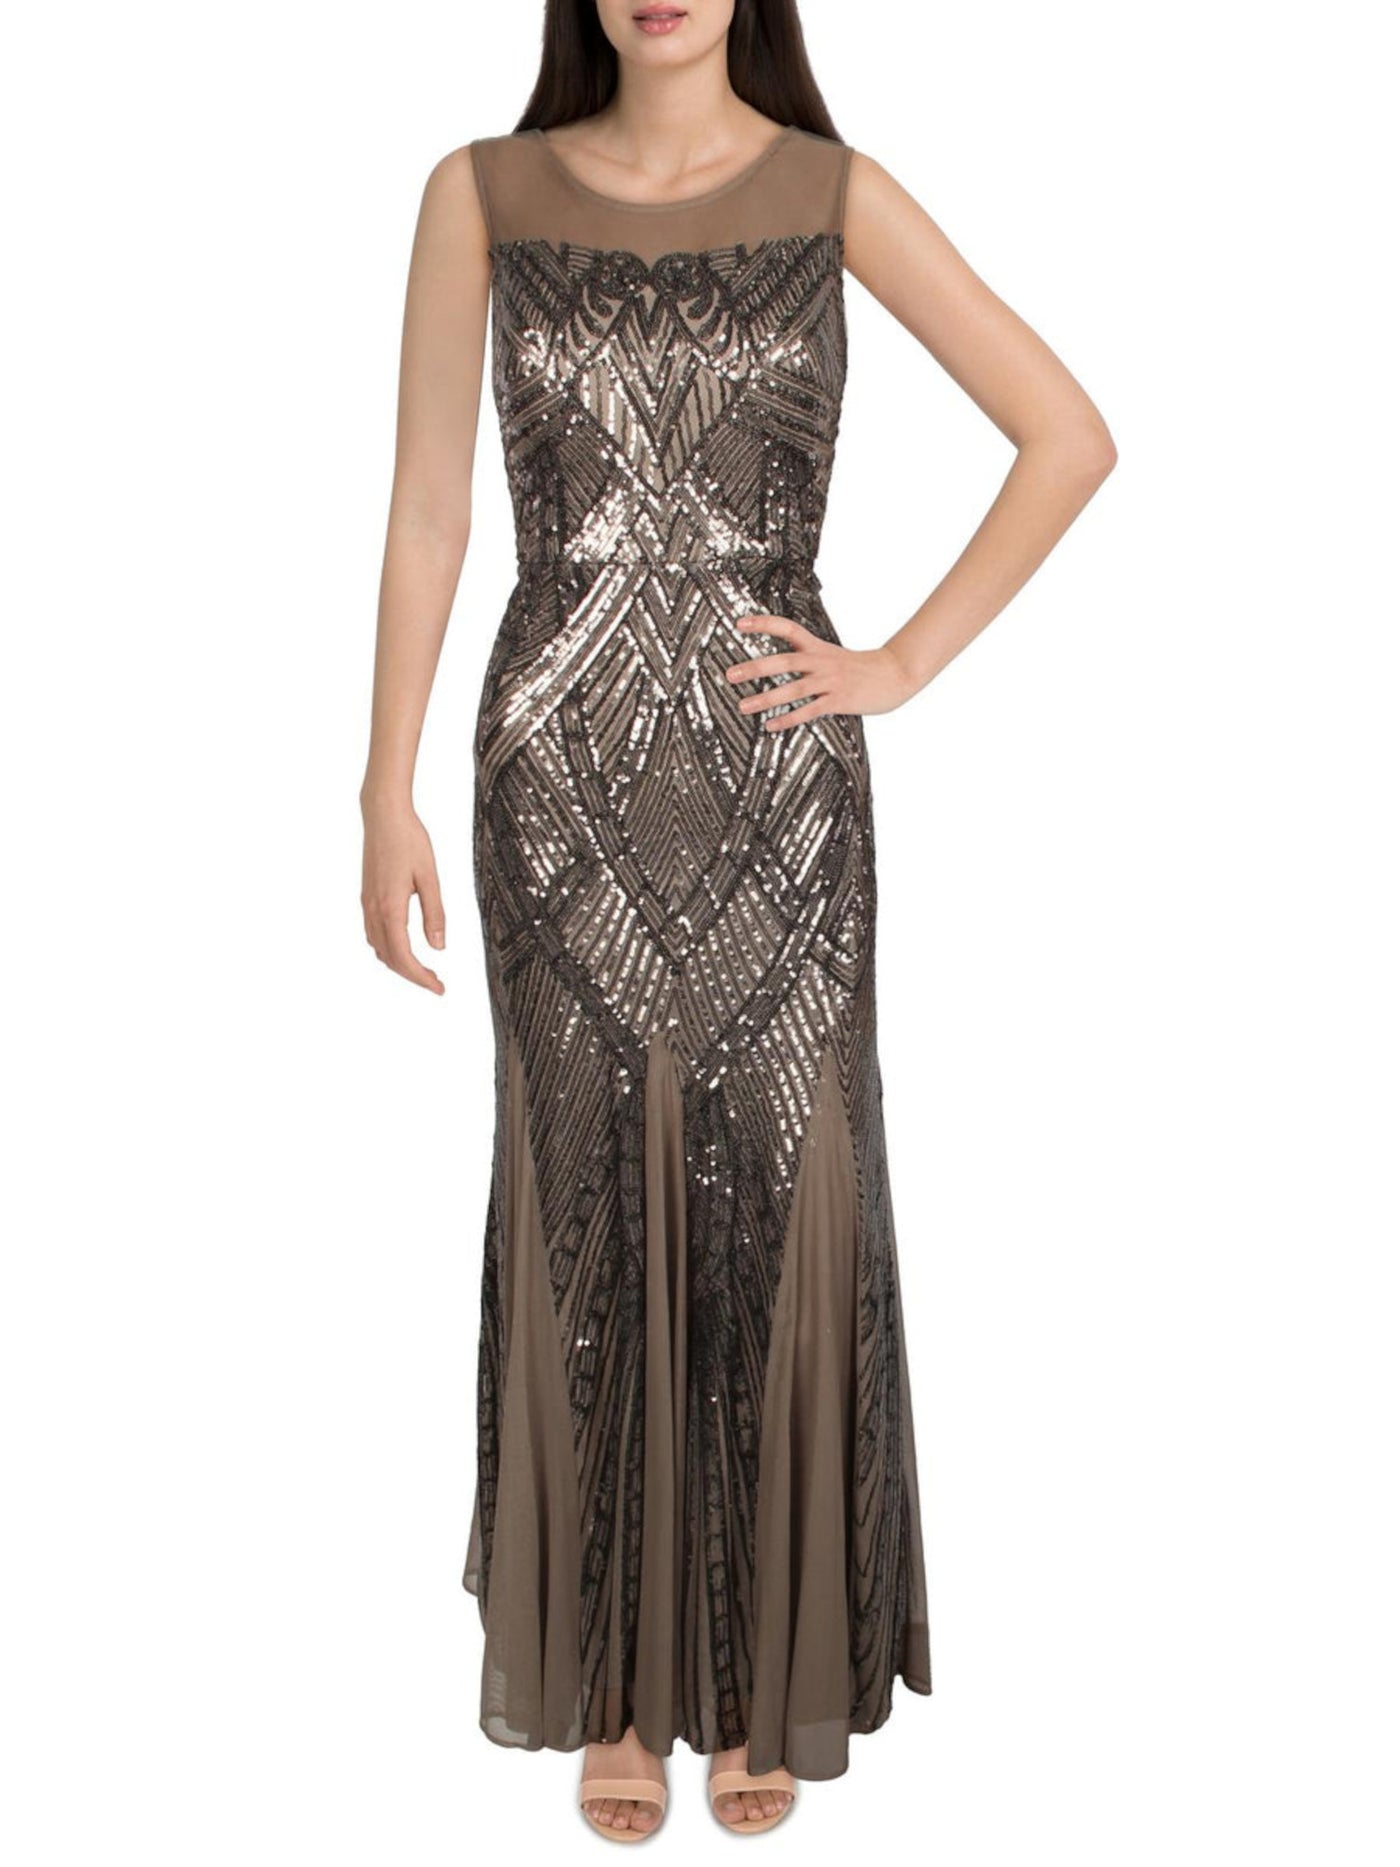 NIGHTWAY Womens Brown Stretch Sequined Zippered Mesh Lined Sleeveless Round Neck Maxi Evening Gown Dress Petites 4P